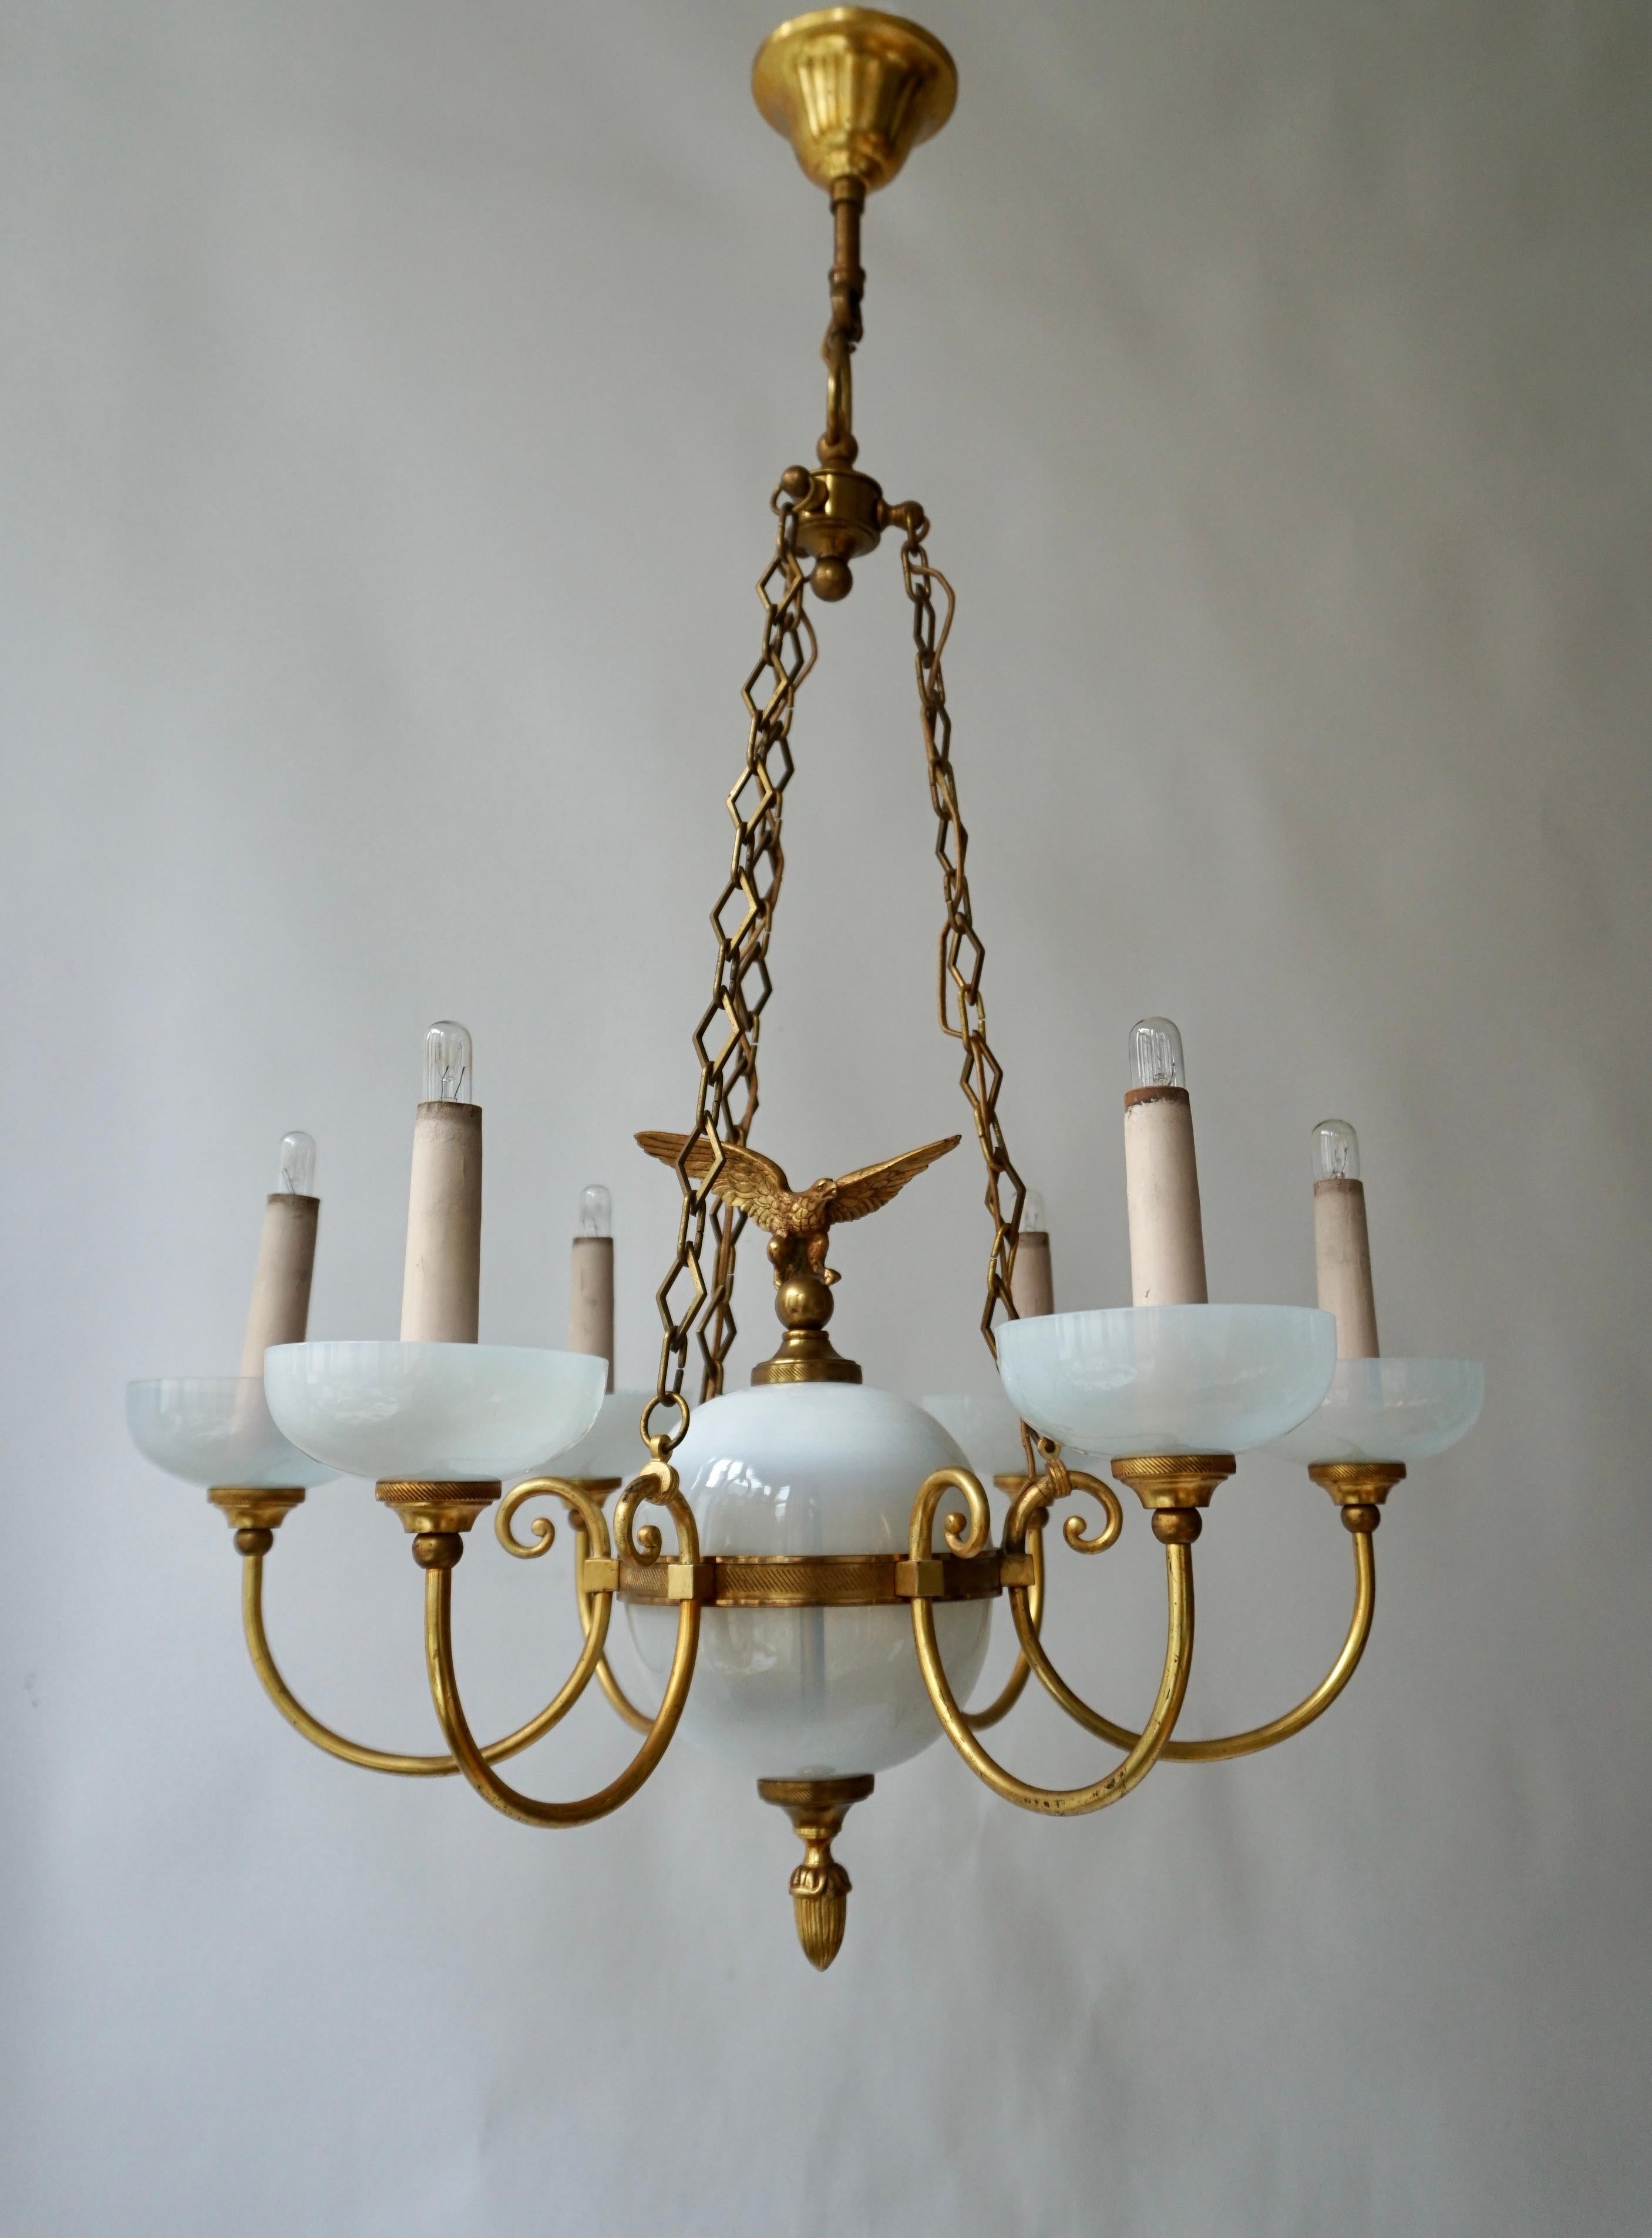 Italian Opaline Chandelier with Central Sphere Decorated with an Eagle. For Sale